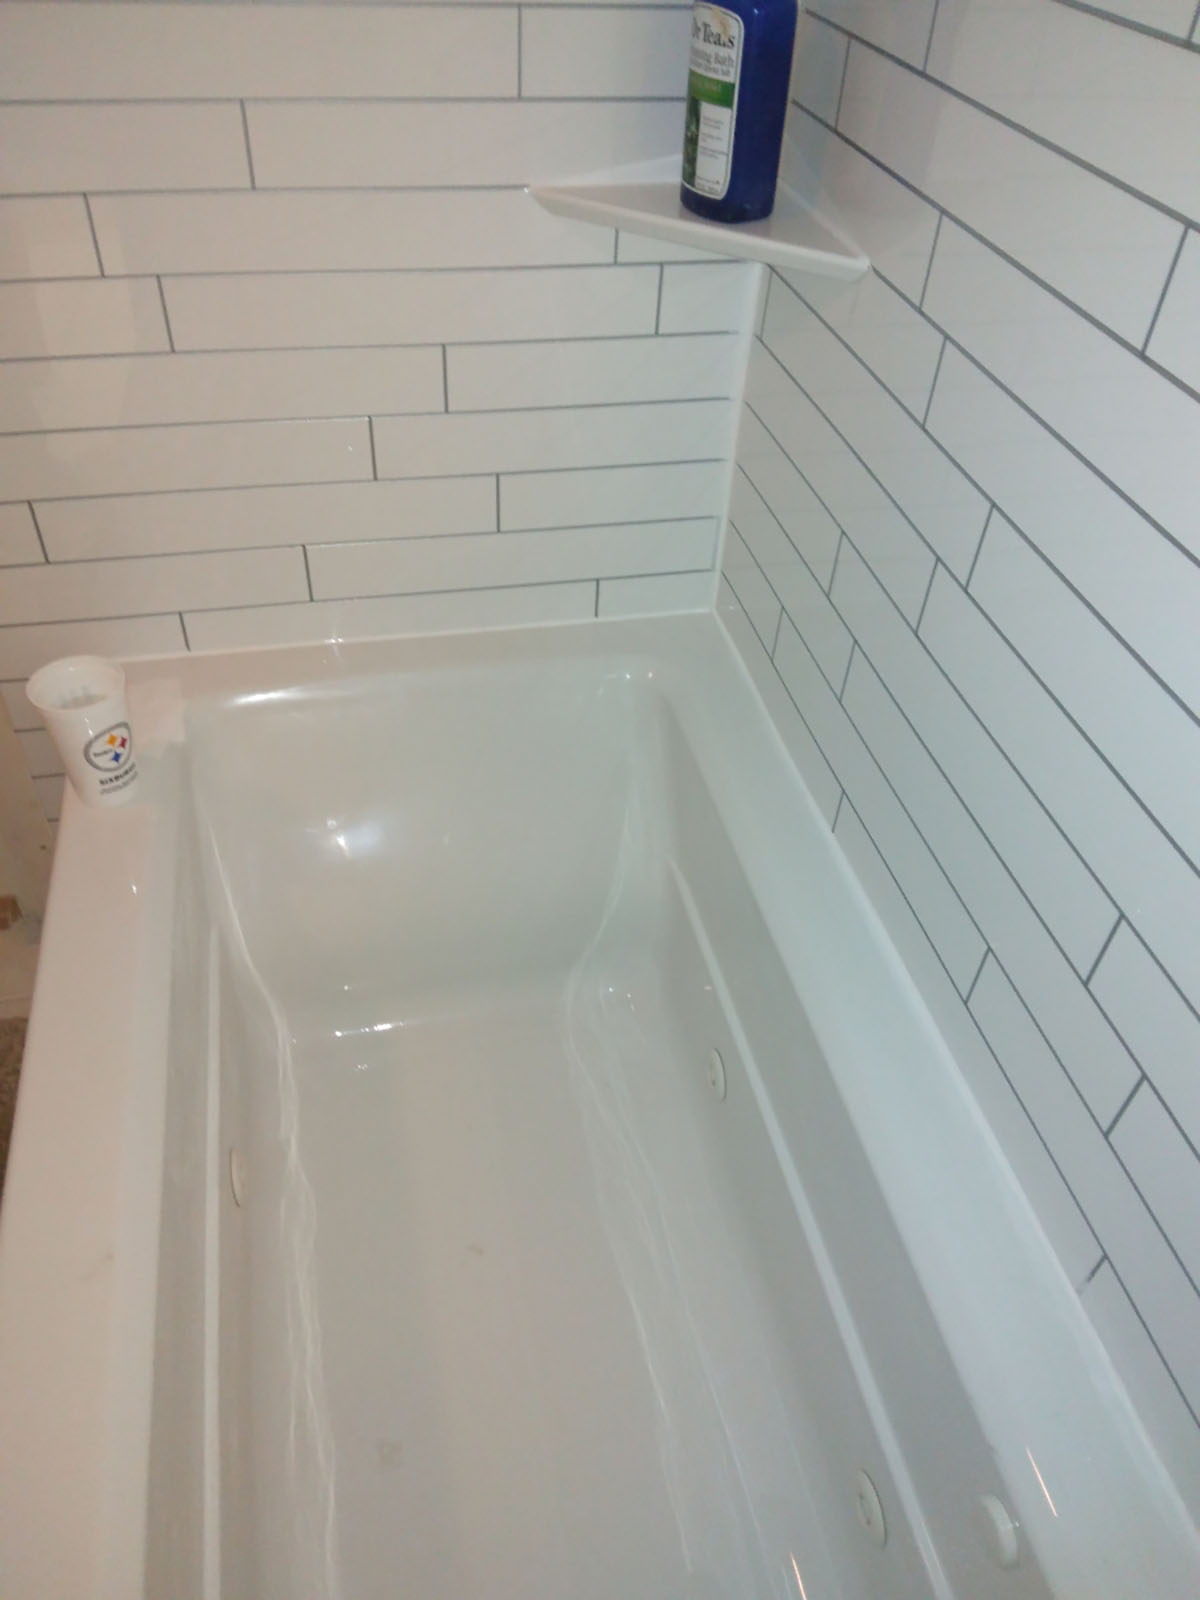 Tub Conversion in a small space